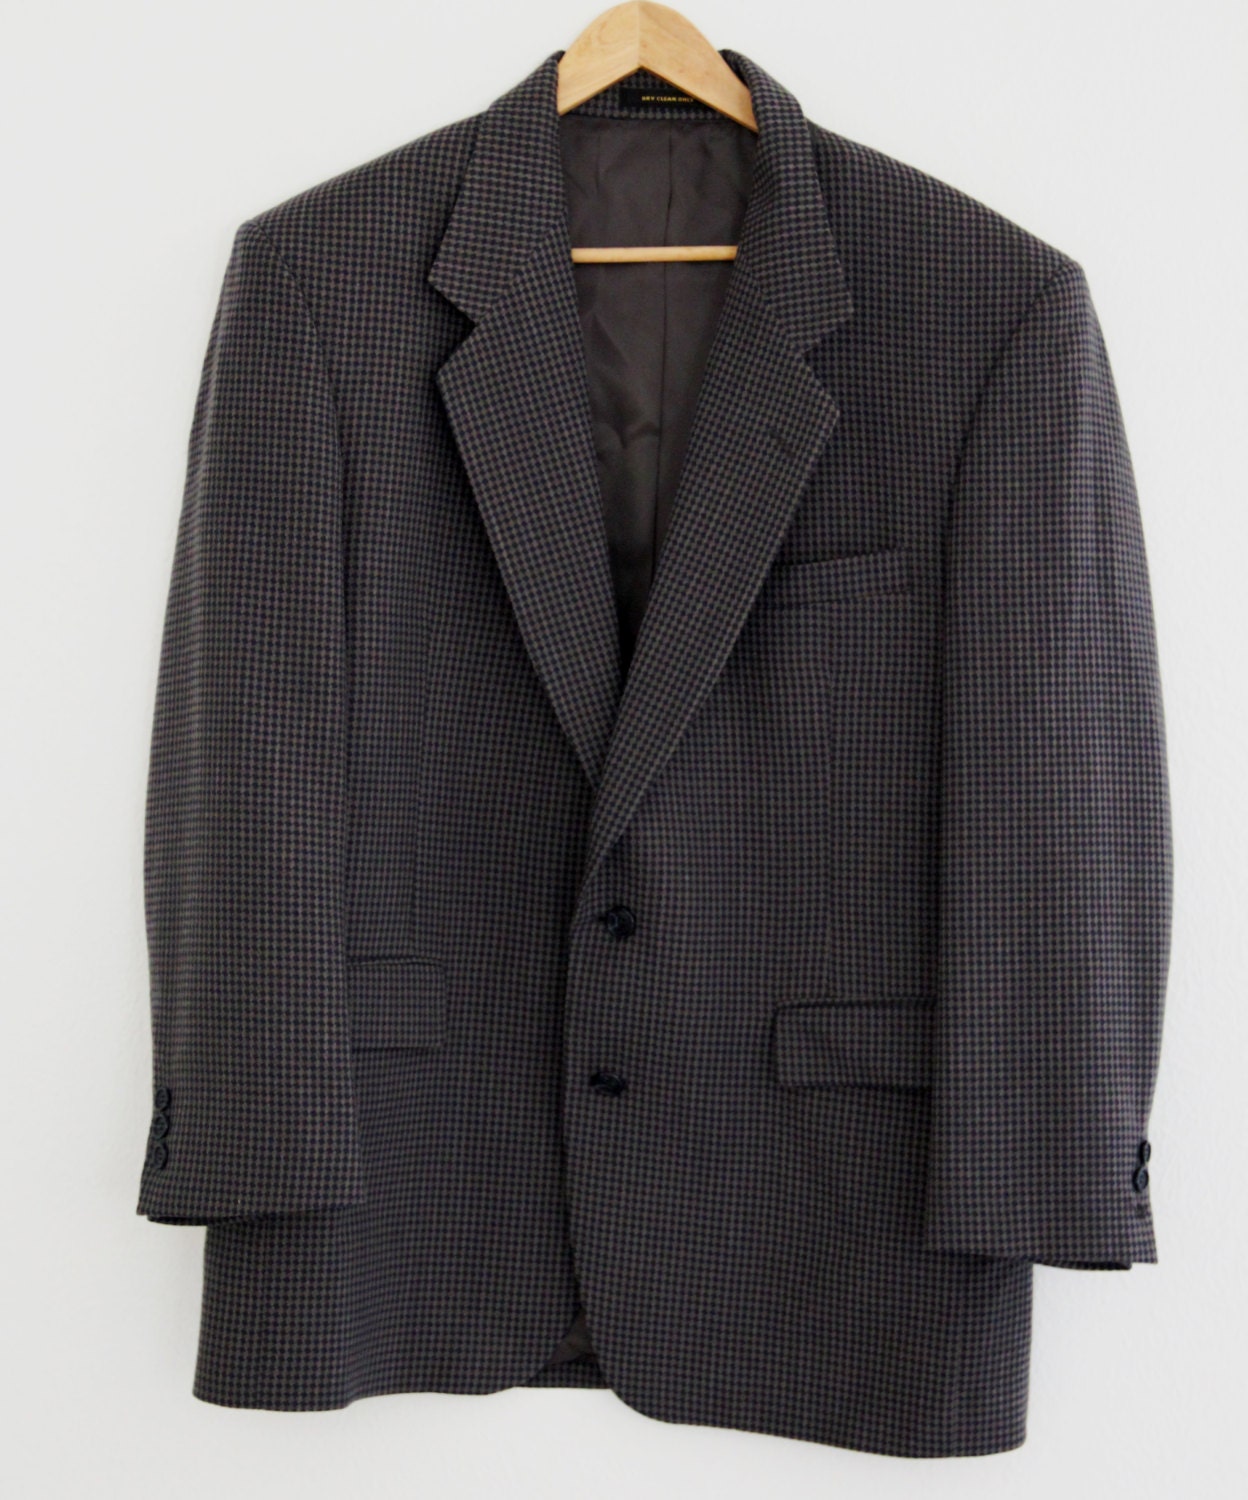 Vintage Mens Givenchy Monsieur Suit Jacket Brown Navy Check